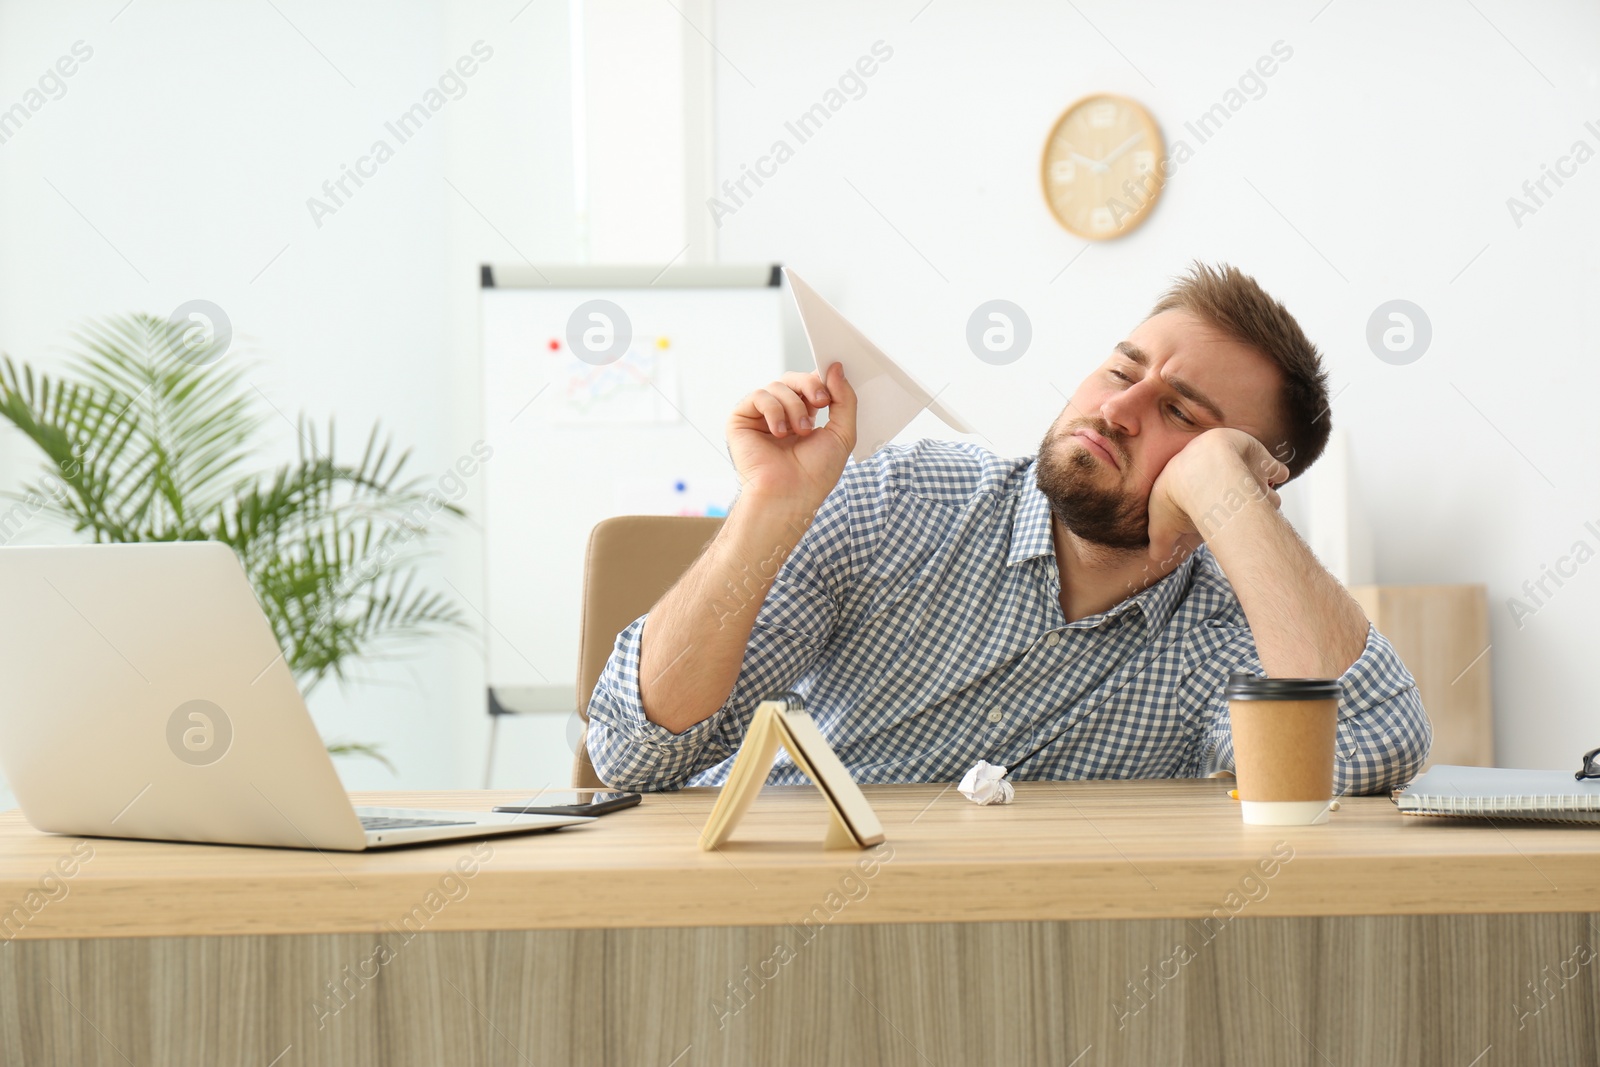 Photo of Lazy office employee playing with paper plane at workplace